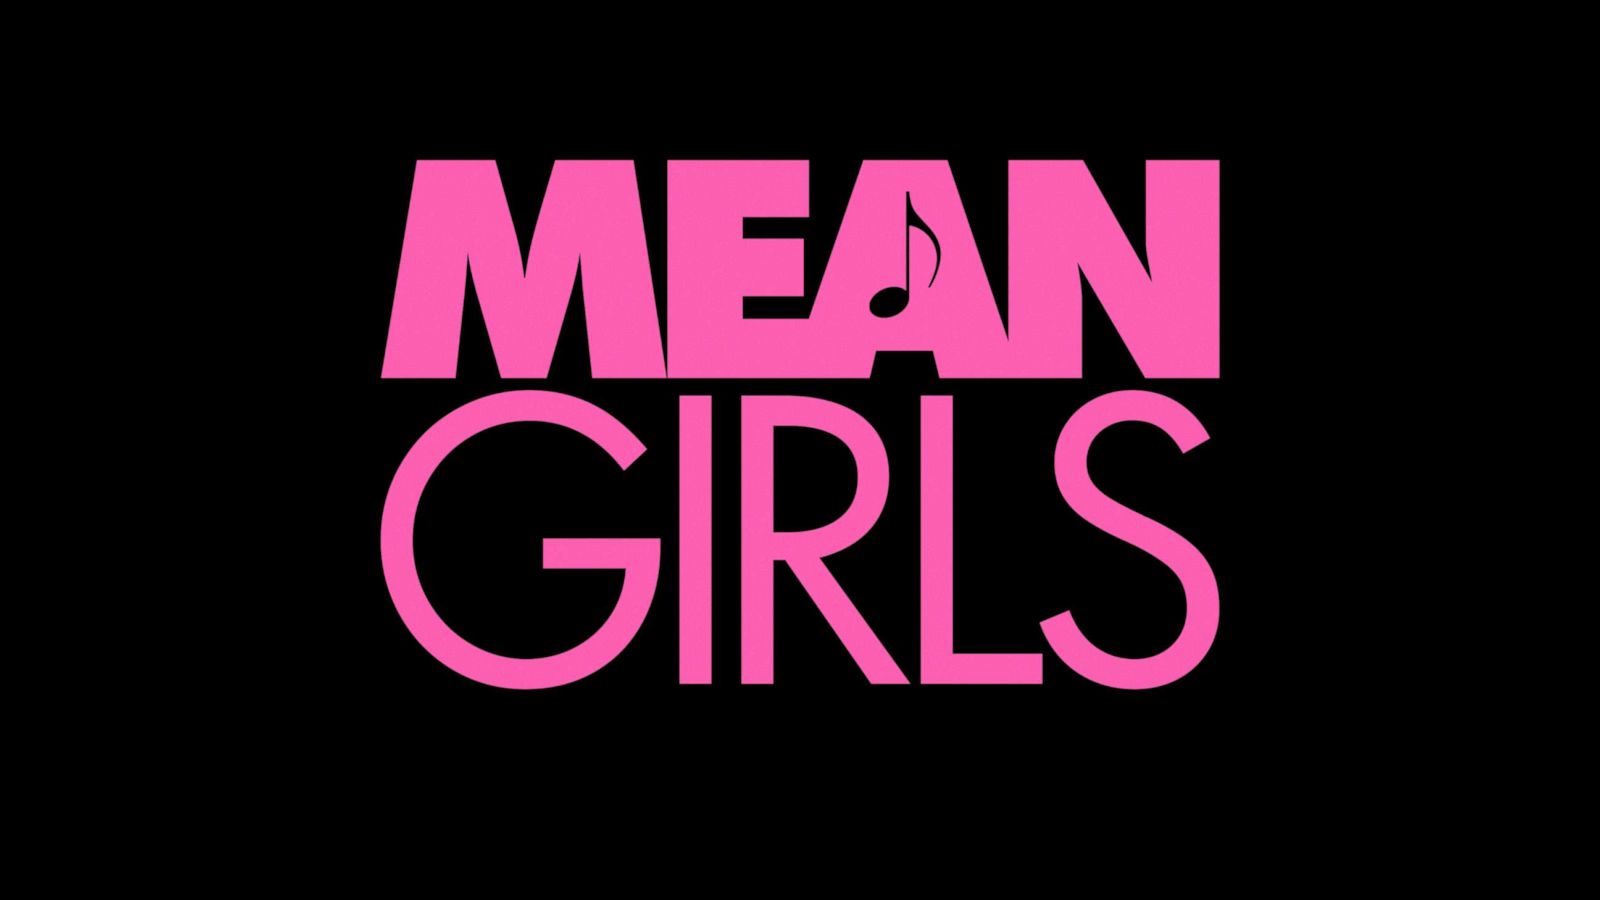 Mean Girls' musical movie adaptation to be released Jan. 12 - Good Morning  America